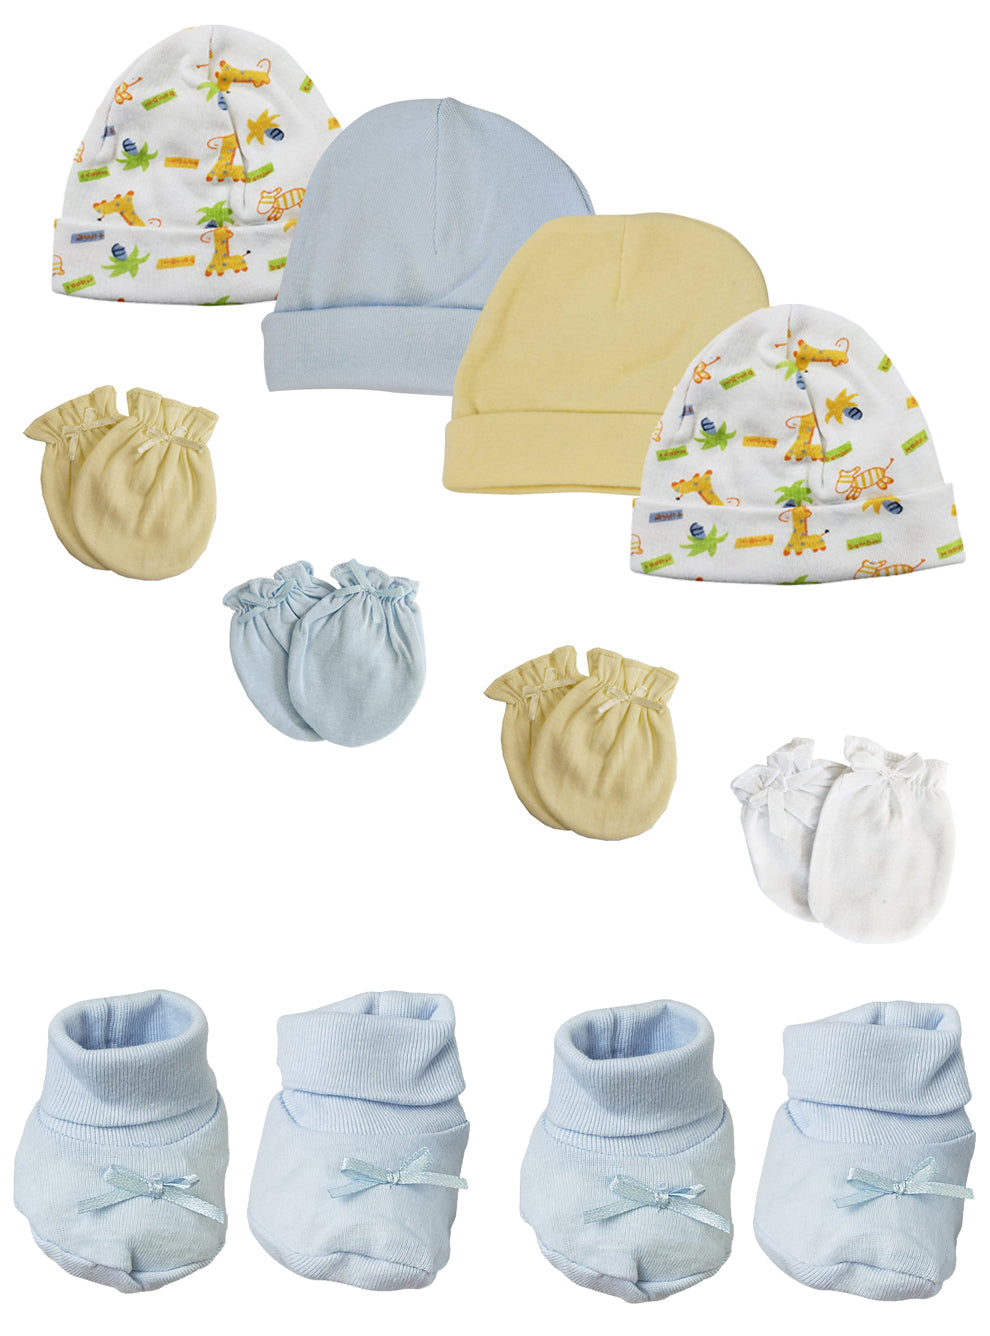 Preemie Baby Boy Caps with Infant Mittens and Booties - 10 Pack NC_0213